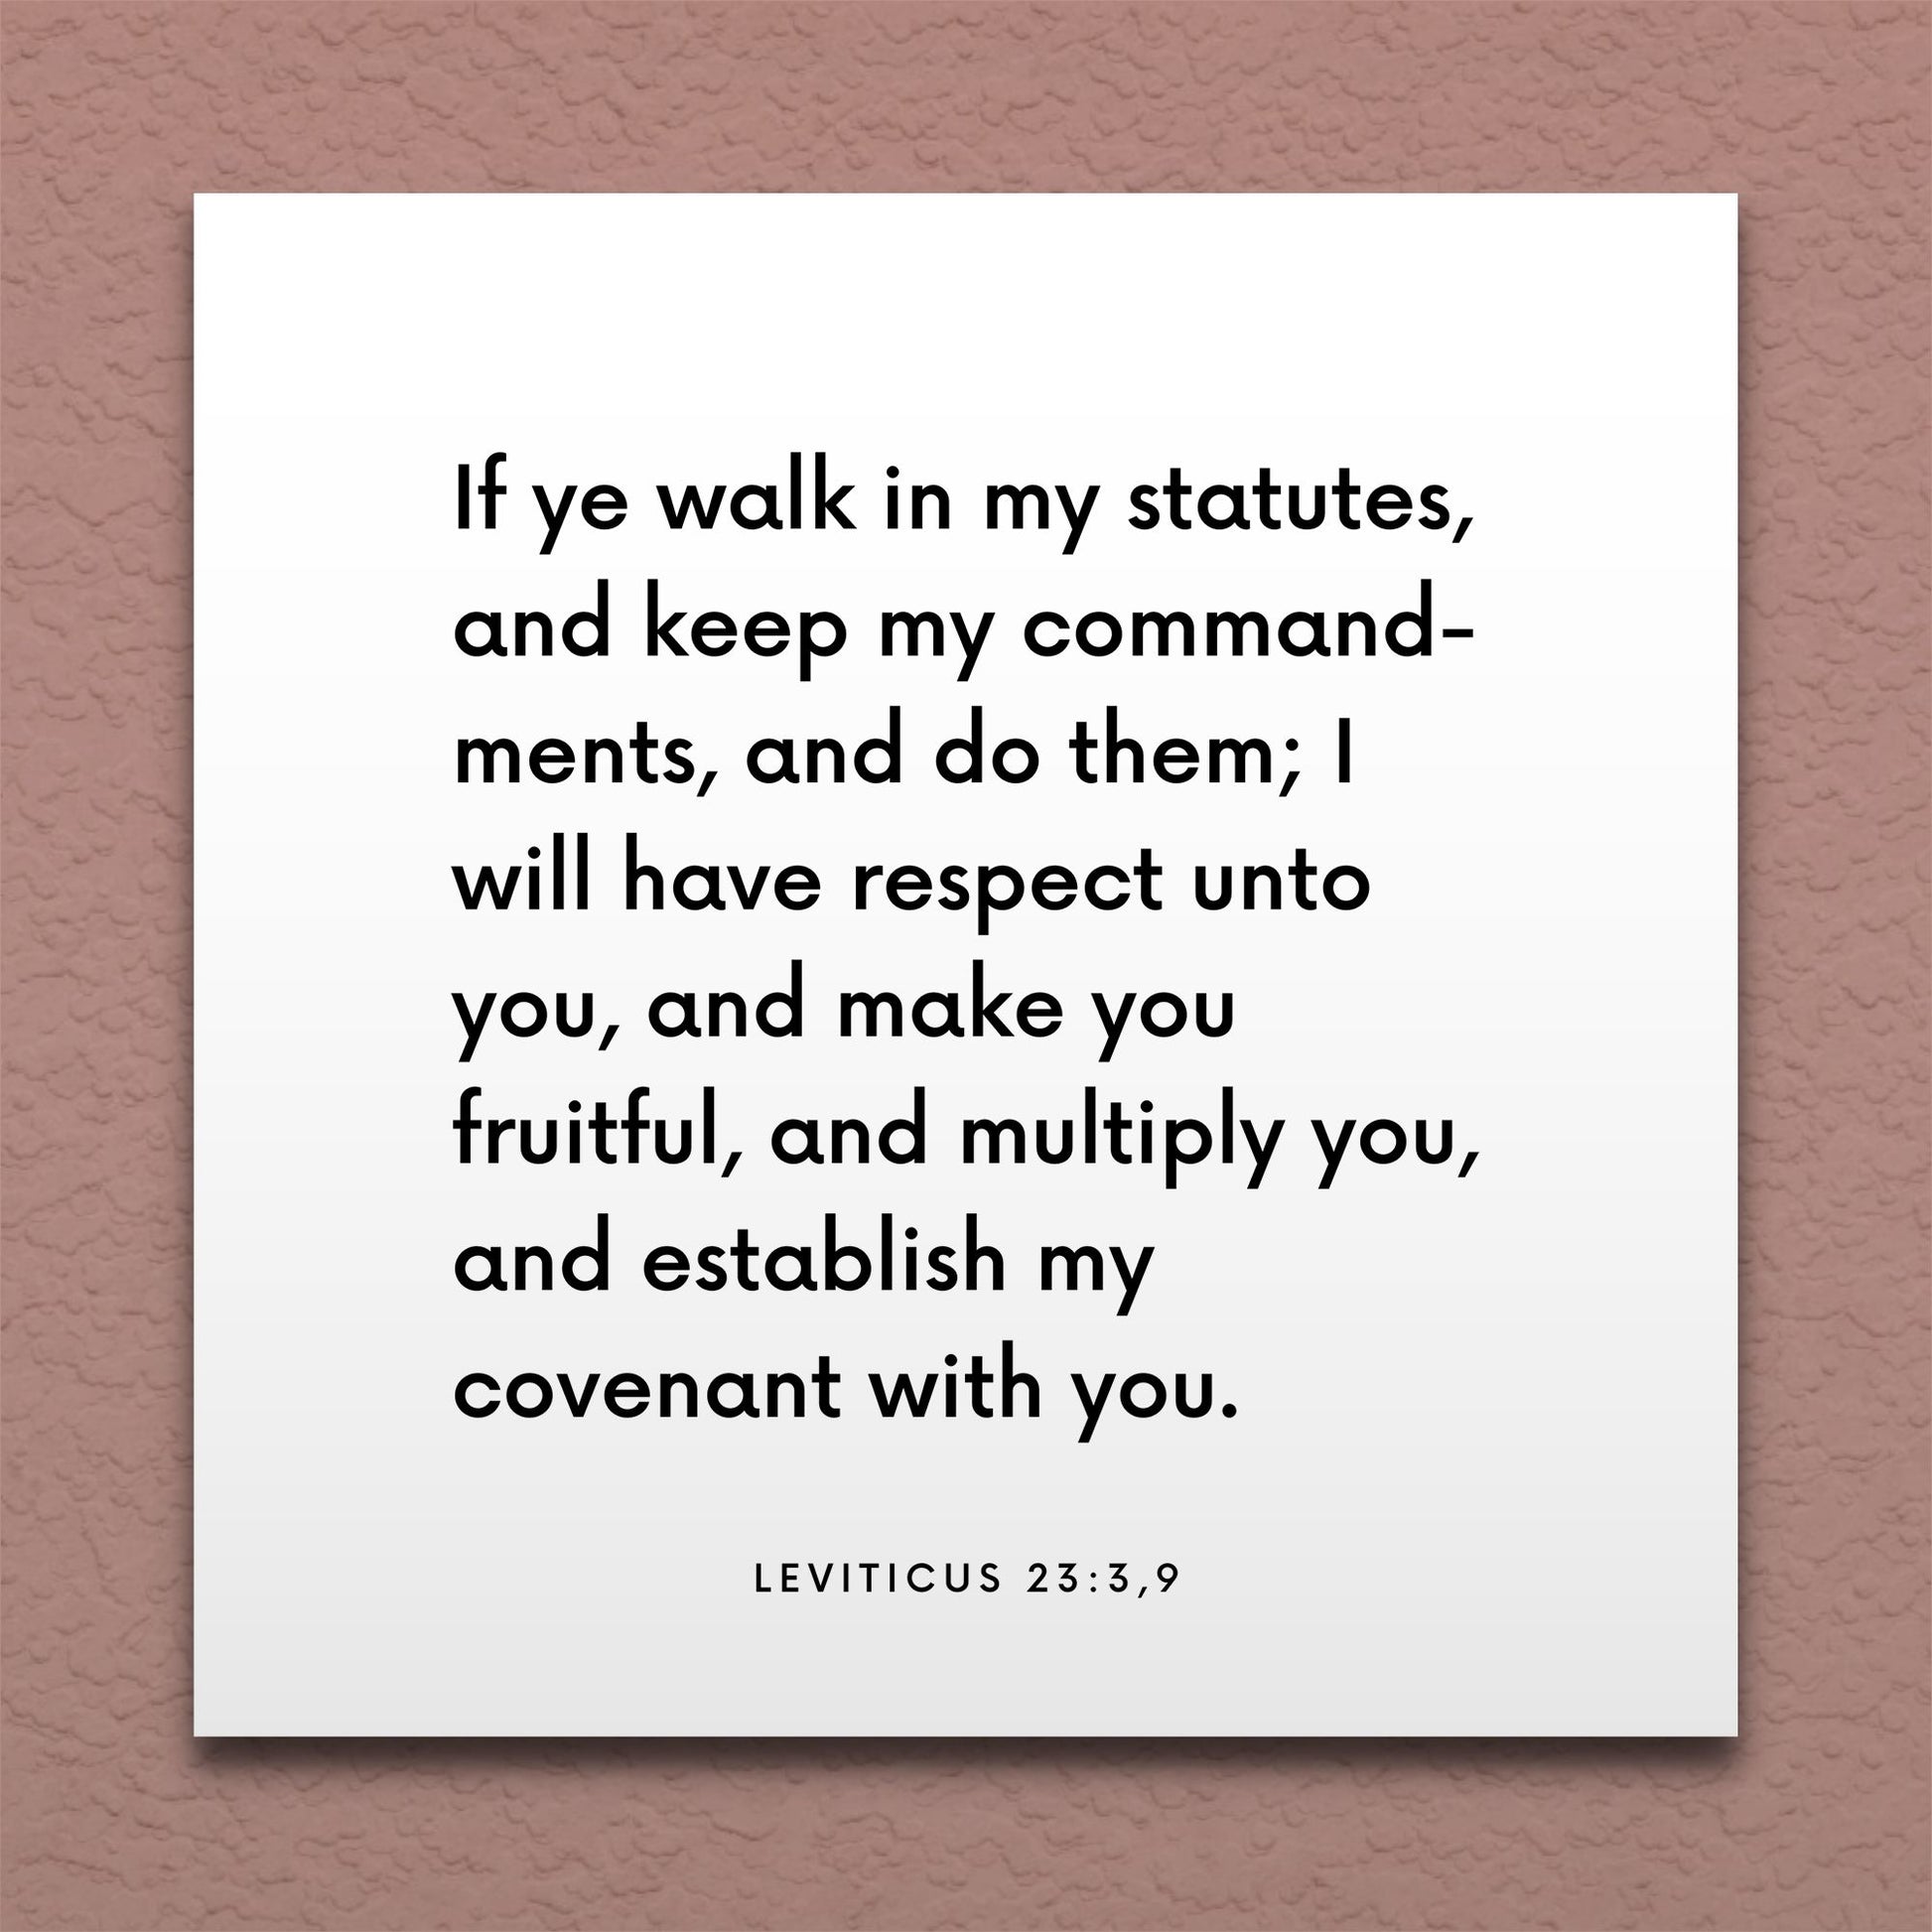 Wall-mounted scripture tile for Leviticus 23:3,9 - "I will have respect unto you, and make you fruitful"